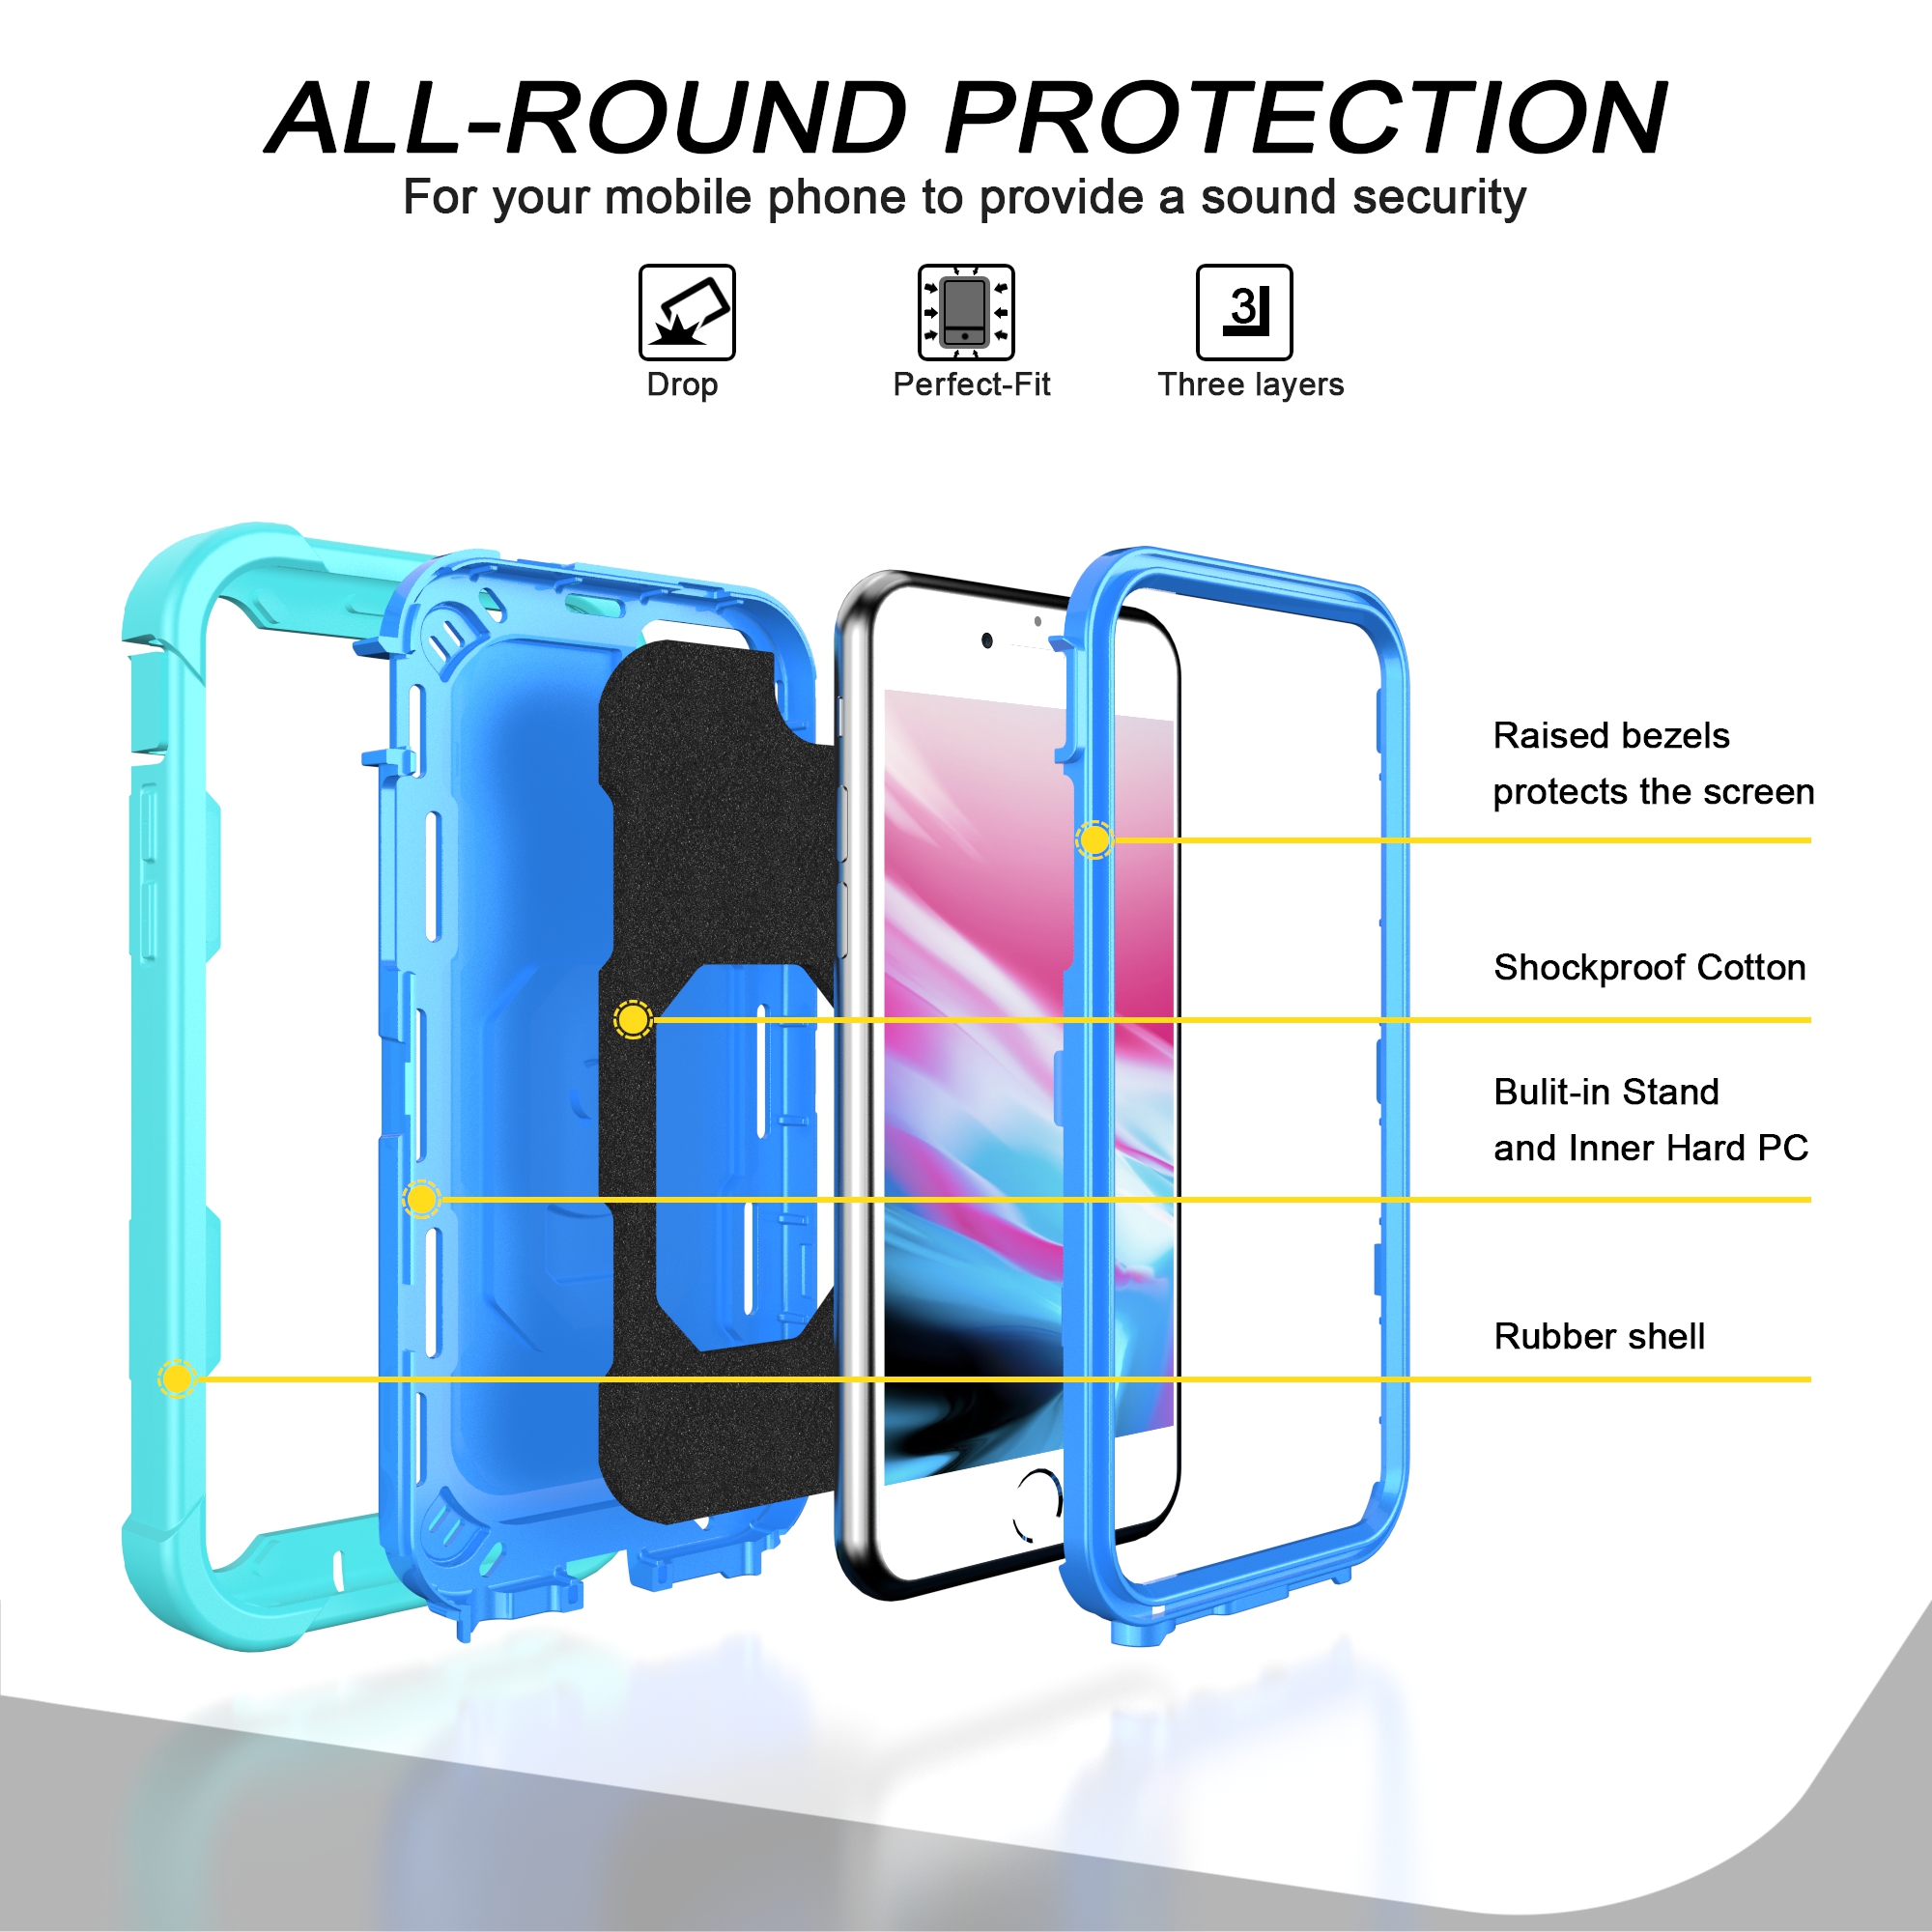 iPhone 6 Case, iPhone 7 Case, iPhone SE 2020 Case 2nd Gen, Allytech Full Body Shockproof Holster Hybrid 3 in 1 Slim Heavy Duty Rugged Case for iPhone 6/7/8/ iPhone SE 2020, Green + Blue - image 2 of 5